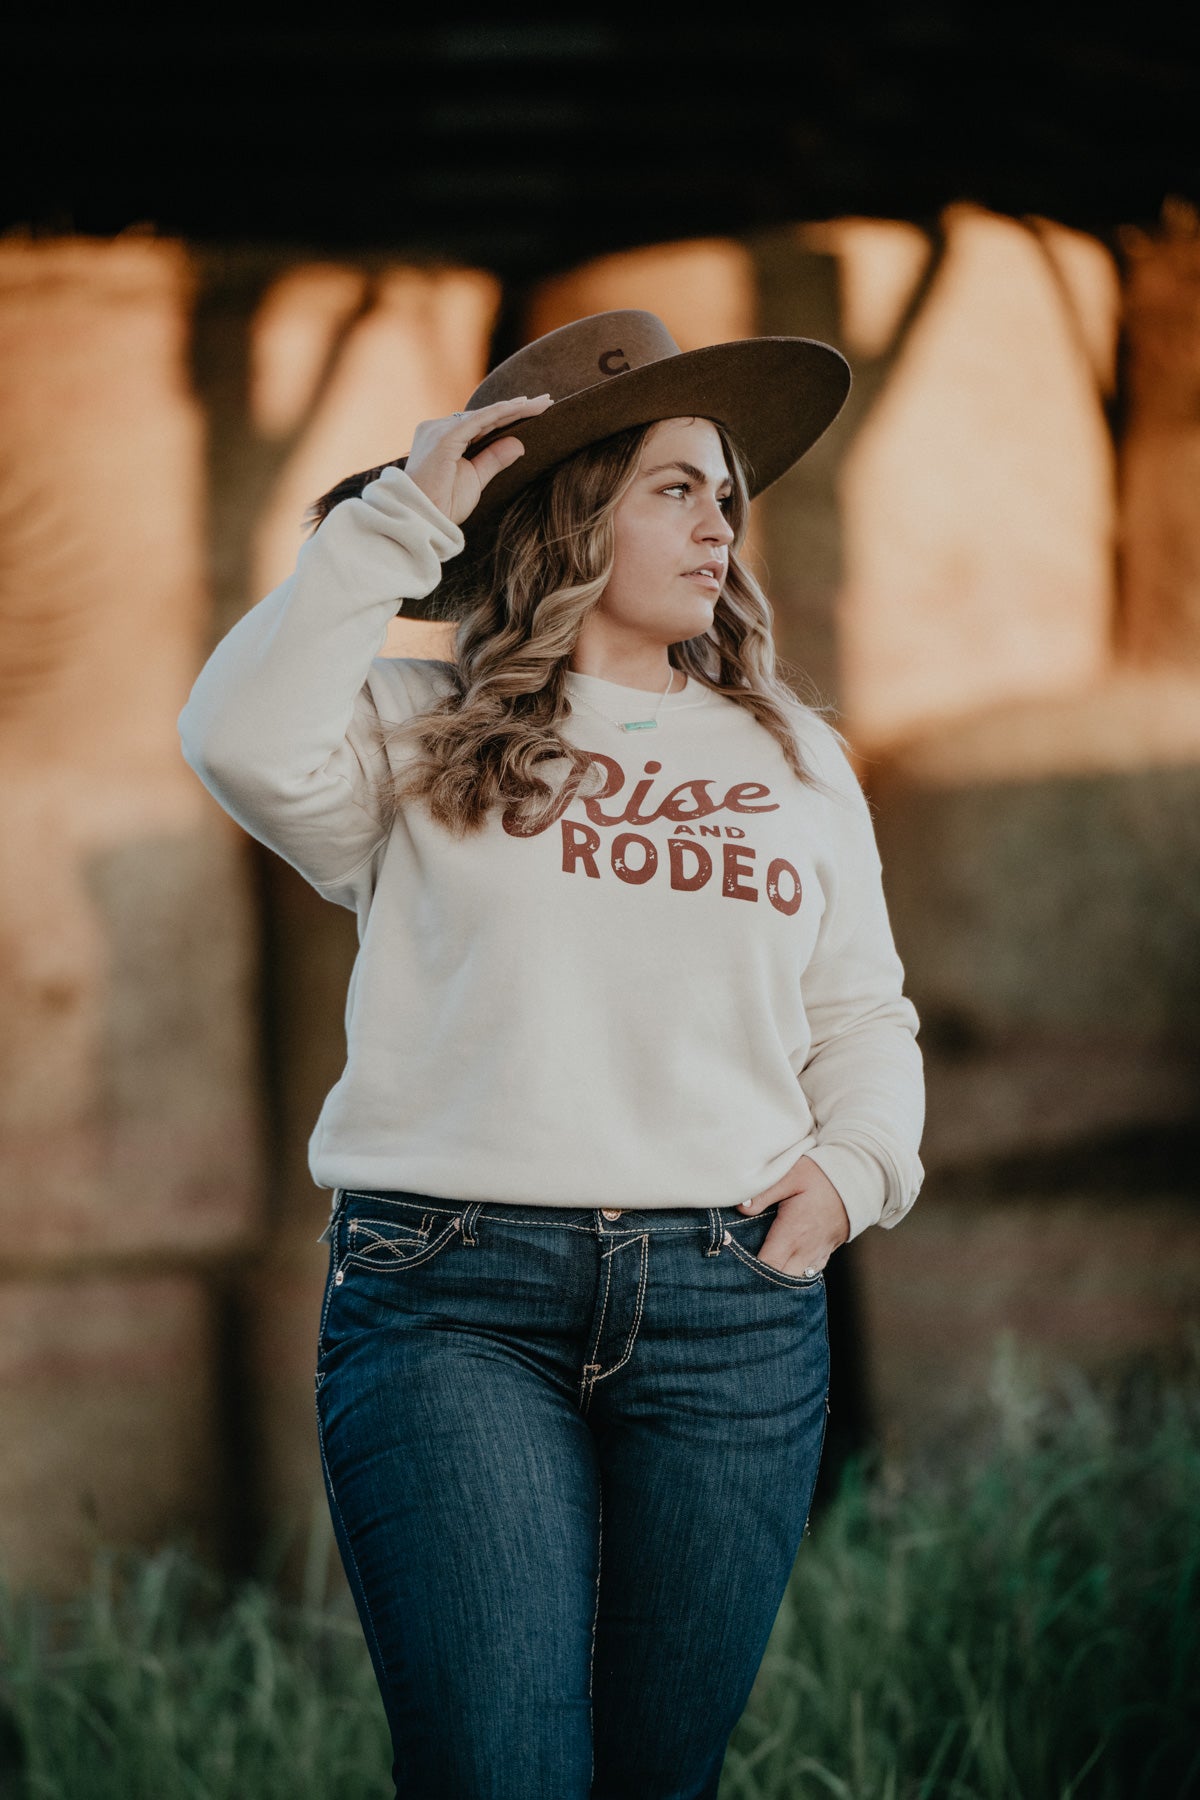 'Rise and Rodeo' Graphic Sweatshirt (S-XL)